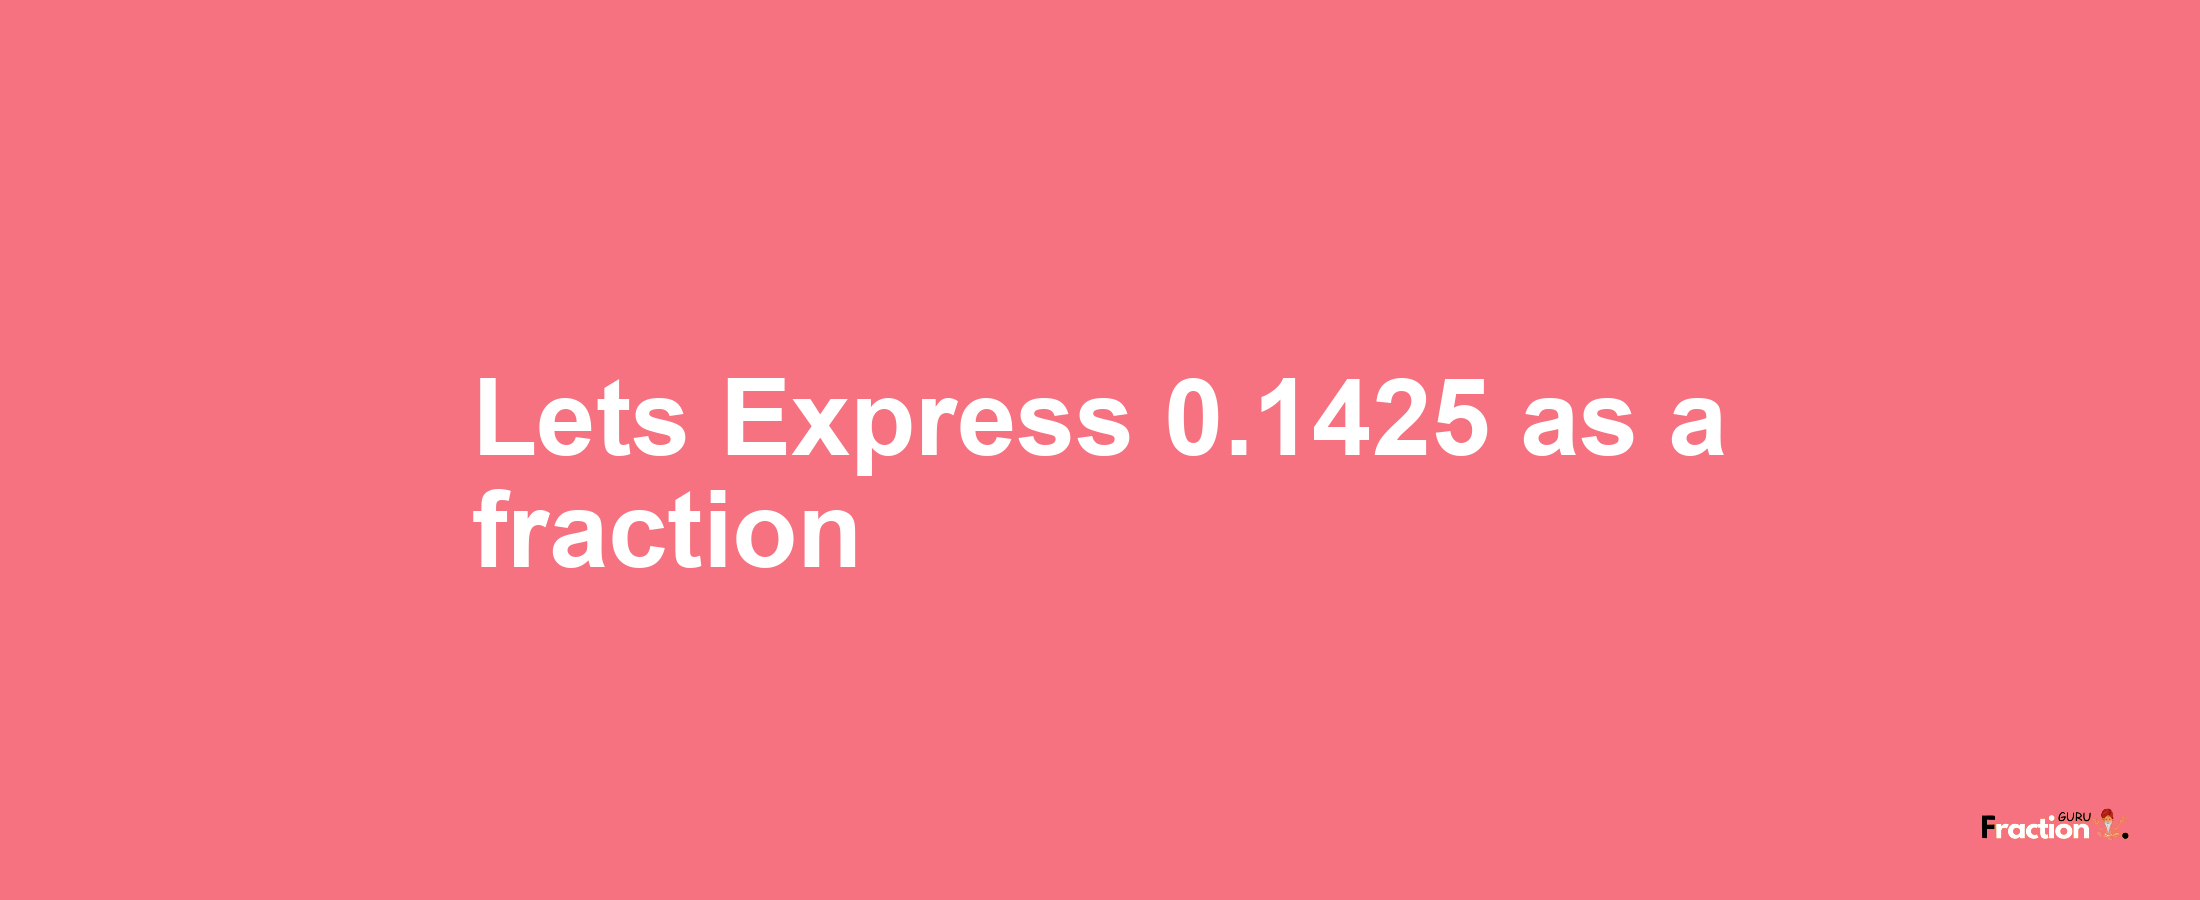 Lets Express 0.1425 as afraction